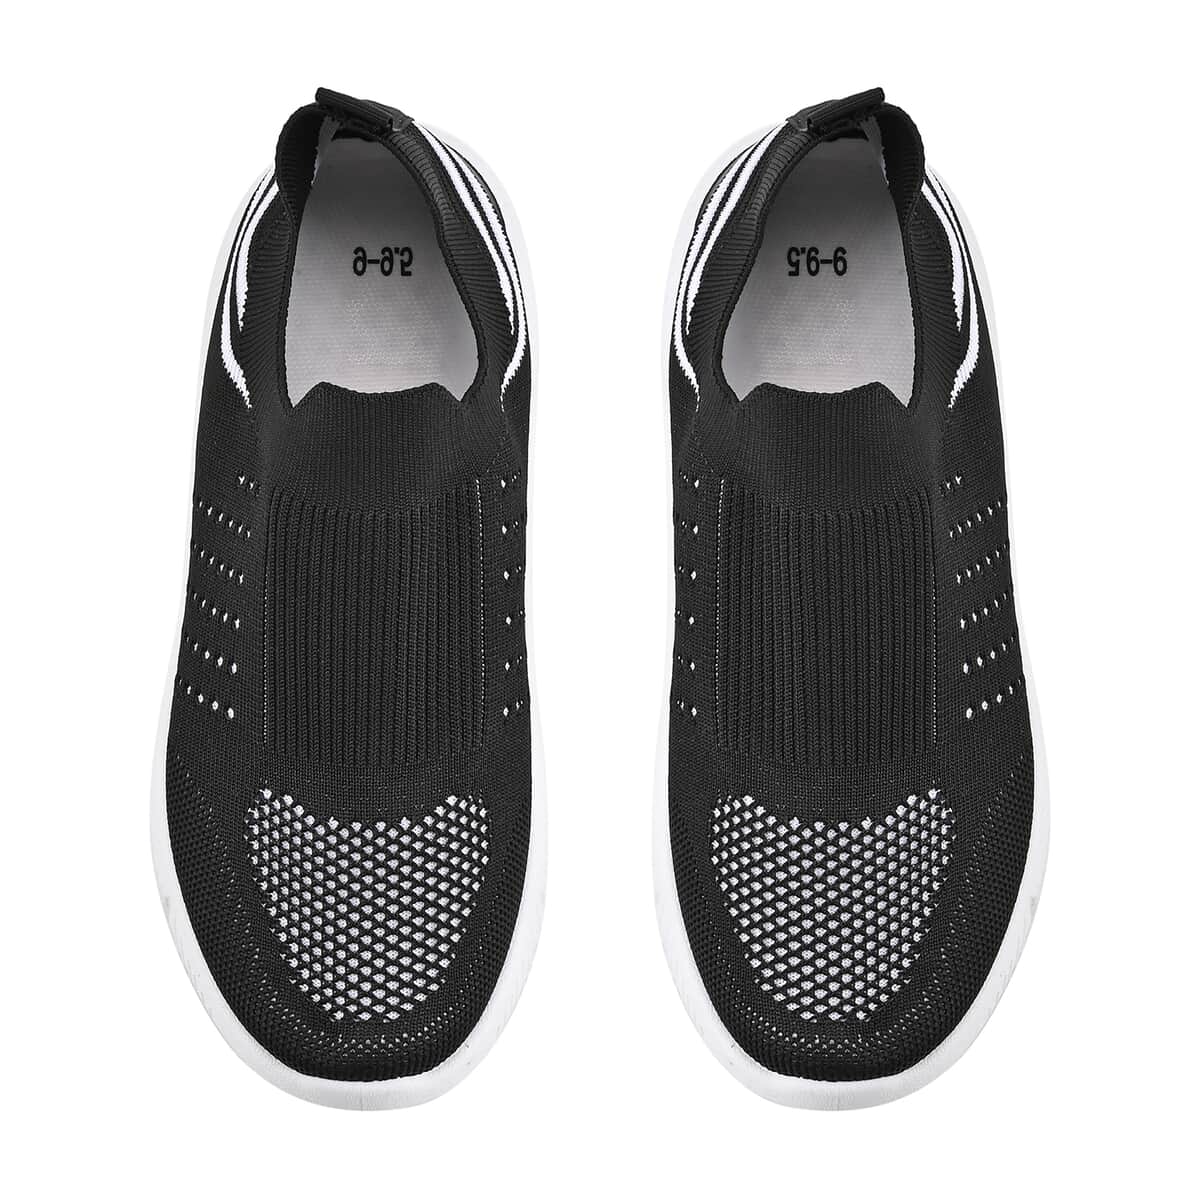 Black Comfortable Lightweight Slip-On Women Trainers Shoes With Breathable Knit Vent Non-Slip PVC Sole, All Day Casual Wear Stylish Sneakers (Size 7-7.5 / 39) image number 2